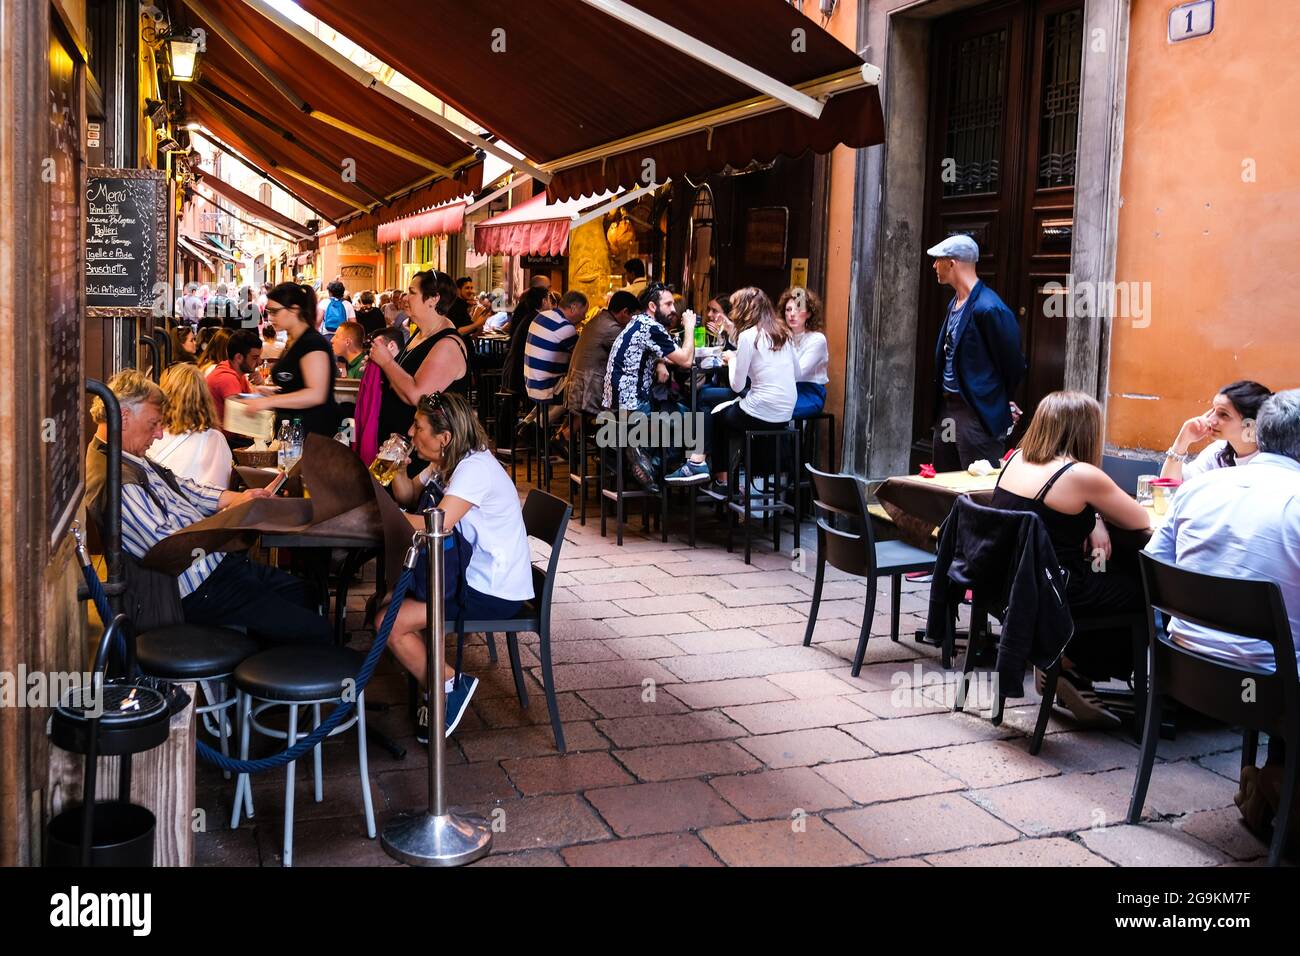 Diners enjoying the food and ambience in the Quadrilatero area of Bologna Italy Stock Photo